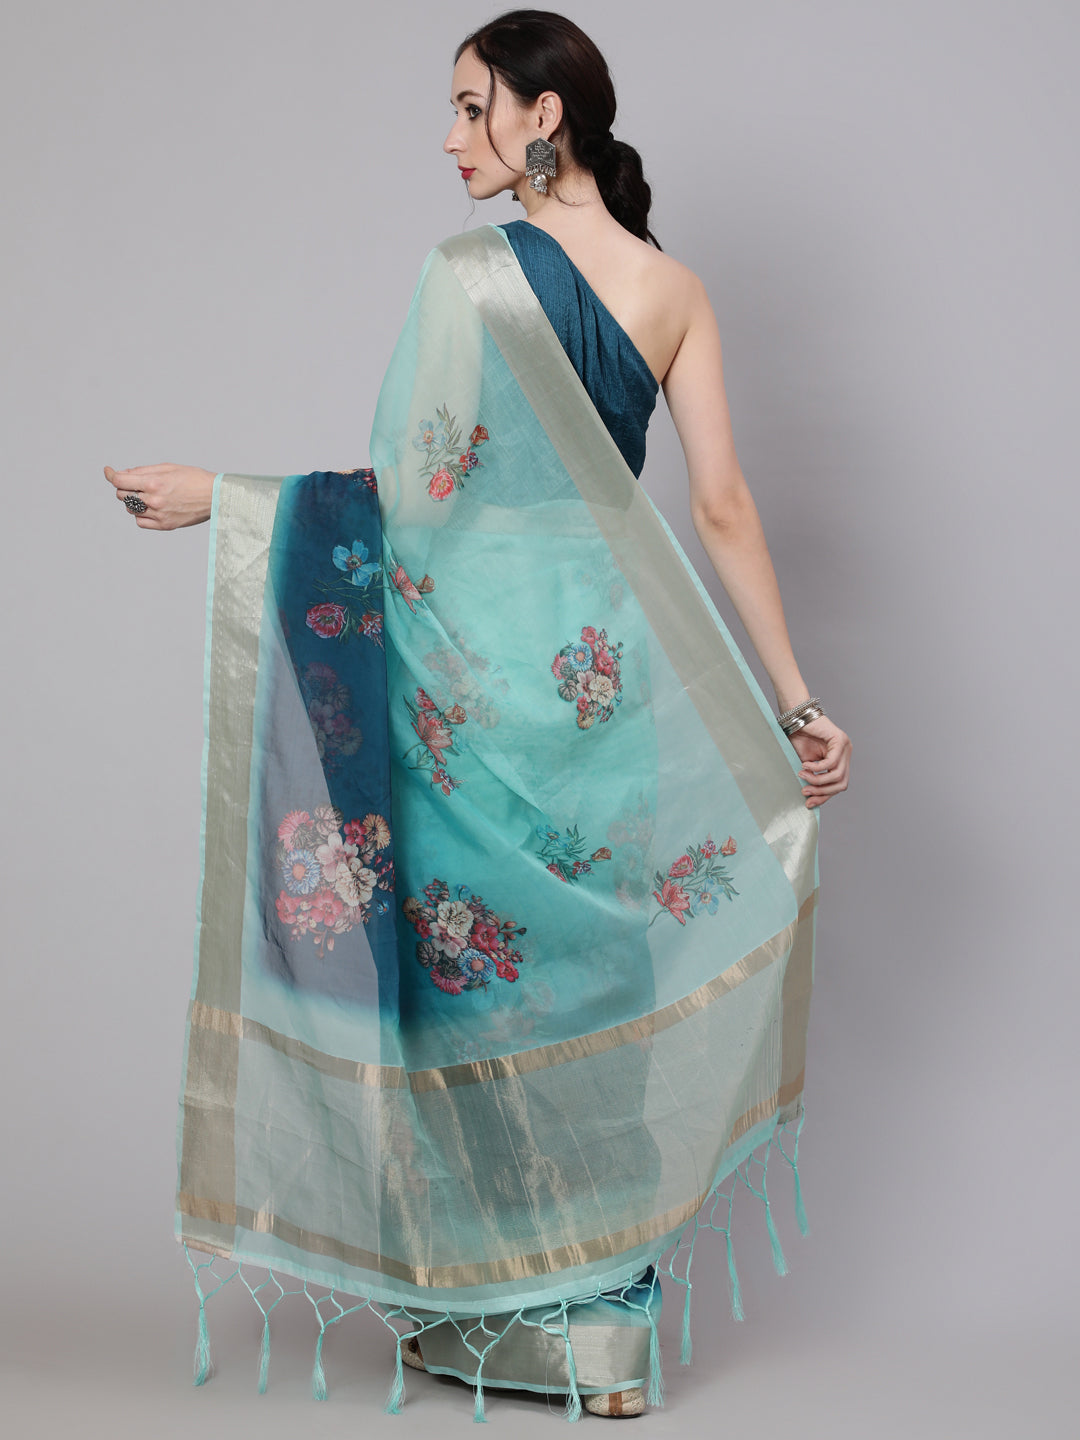 Women's Teal Blue Floral Print Saree With Blouse Piece - Aks